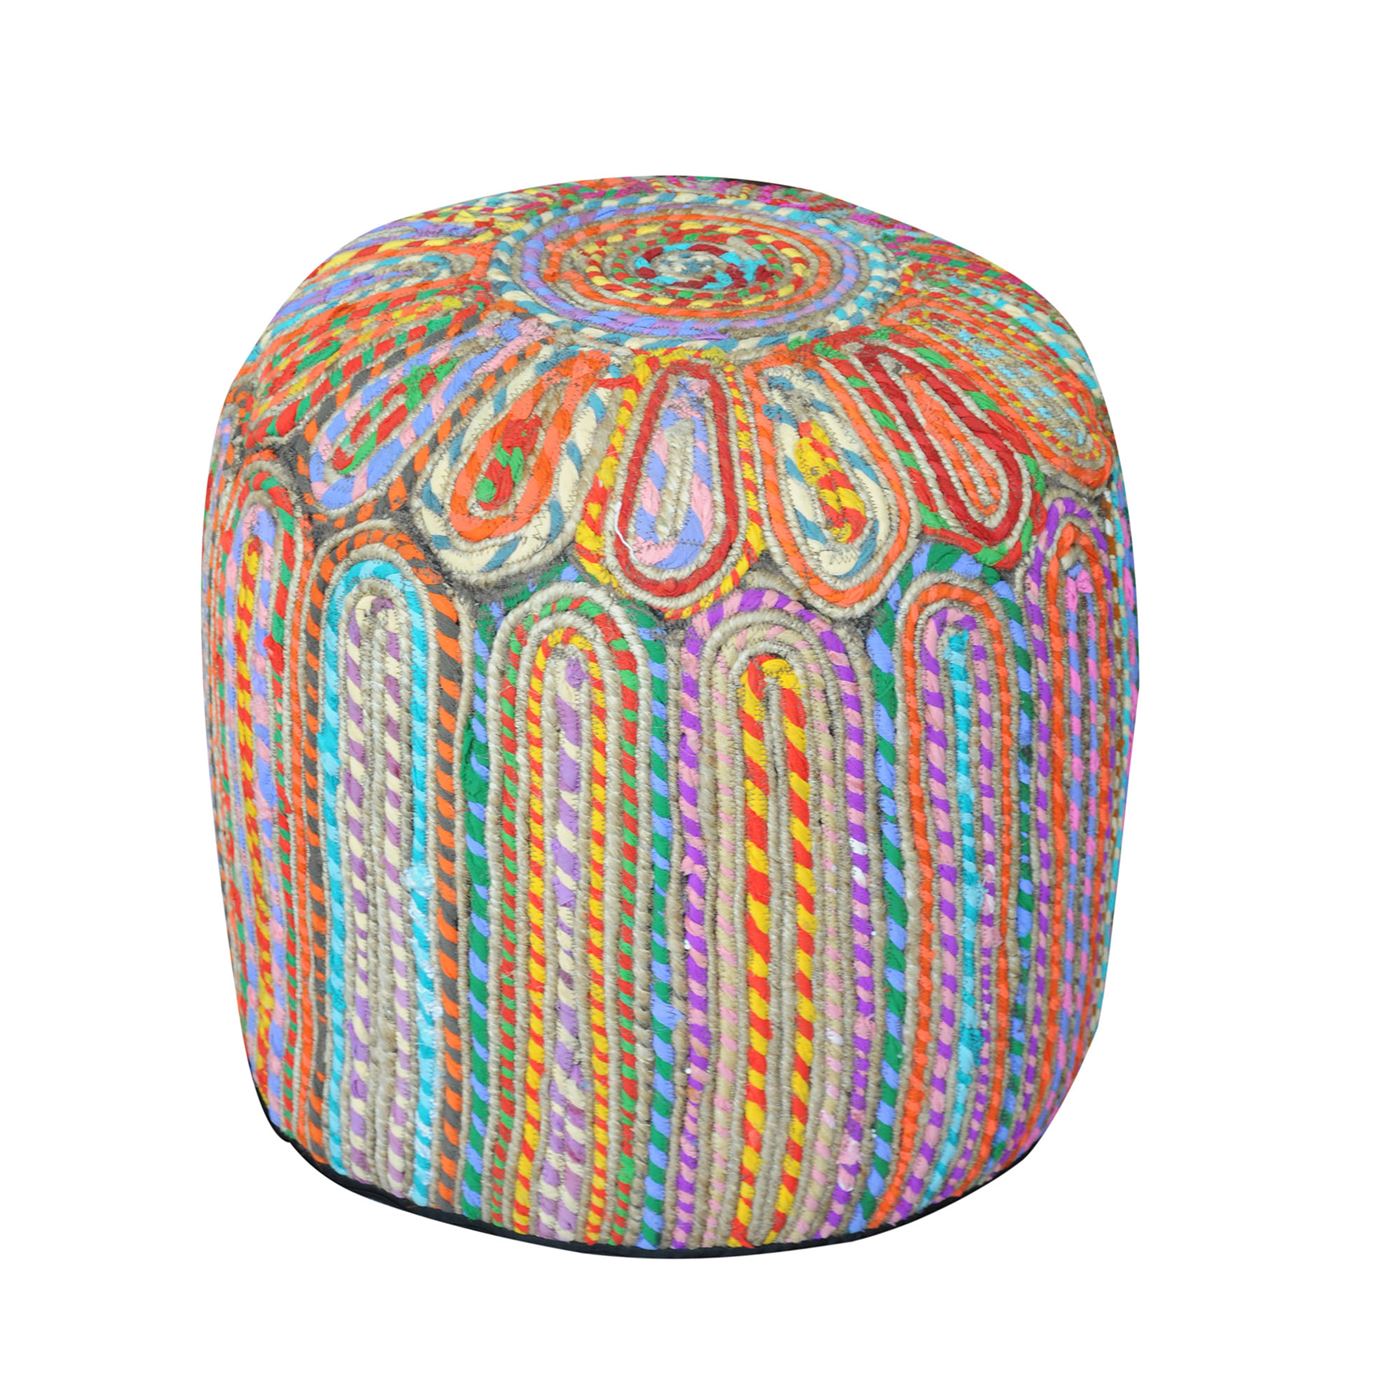 Rainbow Pouf, Recycled Cotton Fabric, Natural Multi, Hm Stitching, Flat Weave 